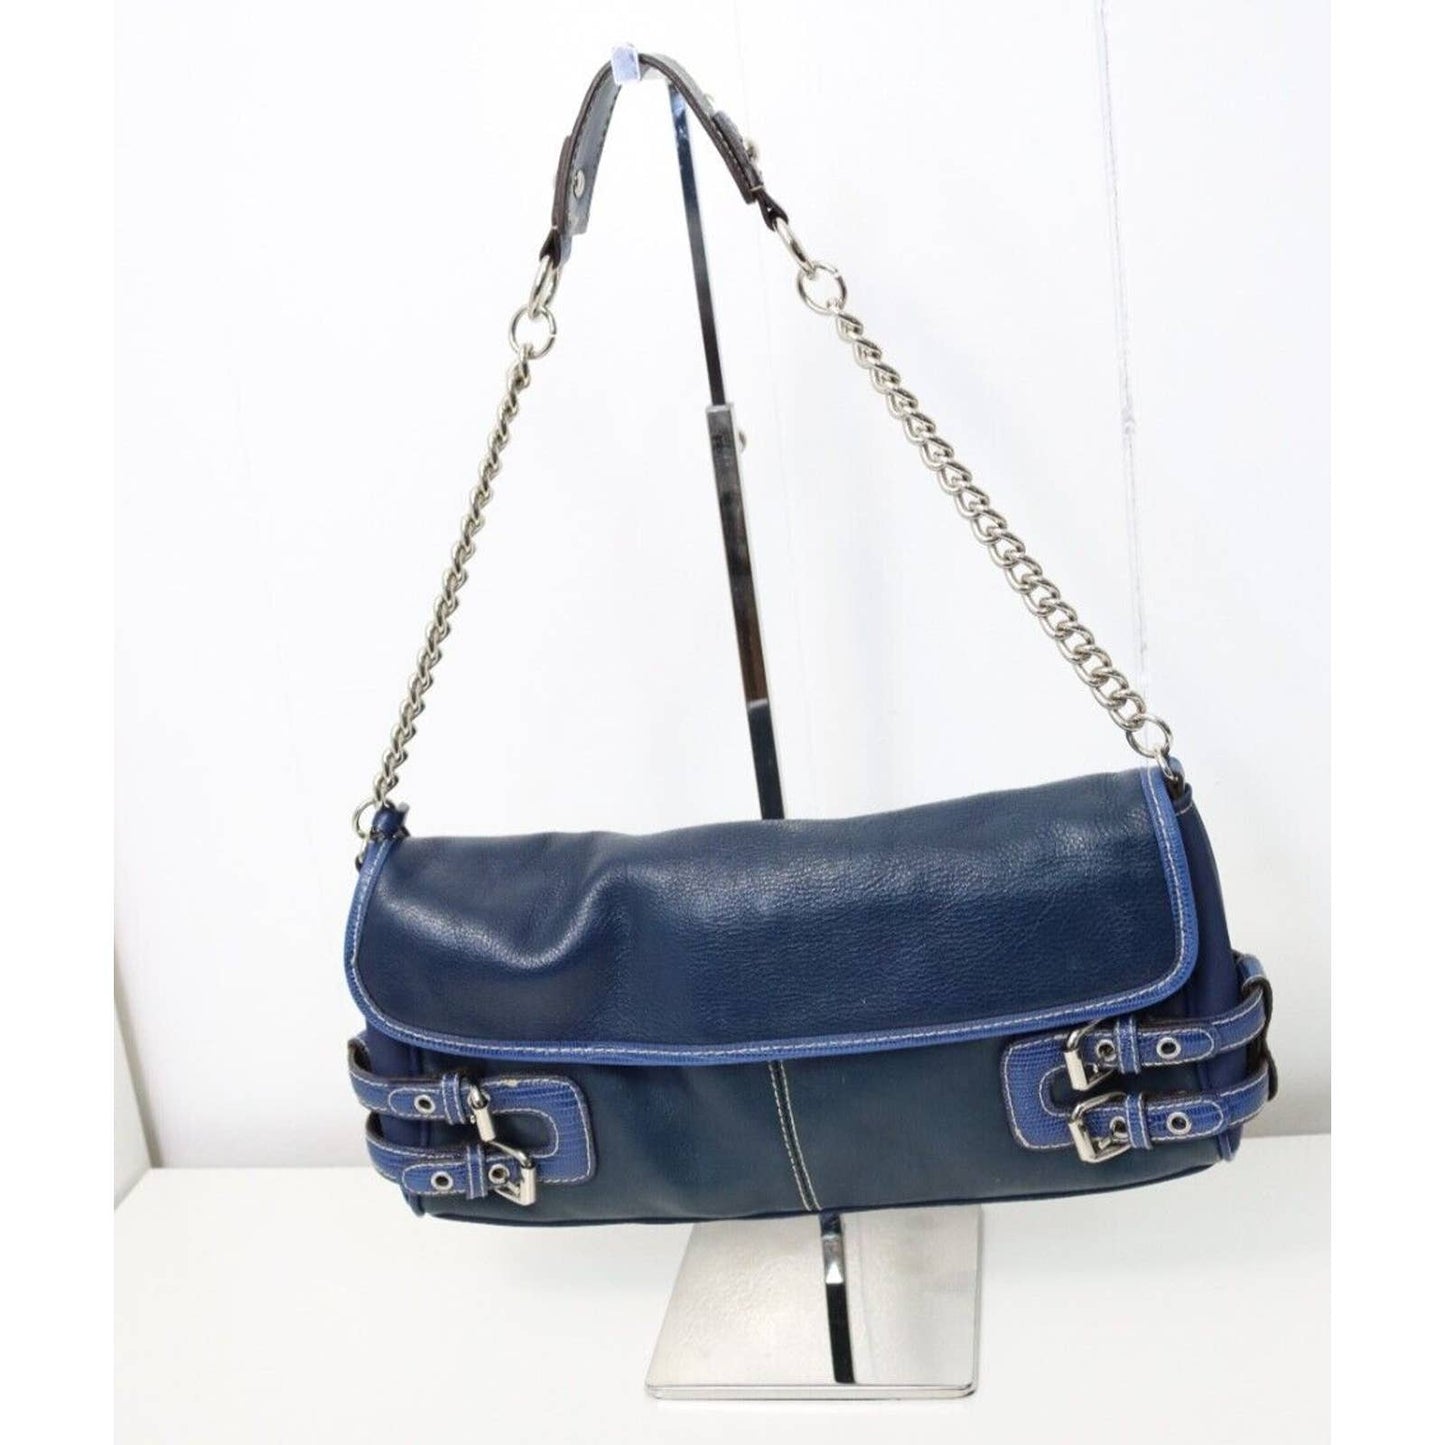 Franco Sarto Blue Leather Purse with a distinctive buckle design and a chic chain on the strap